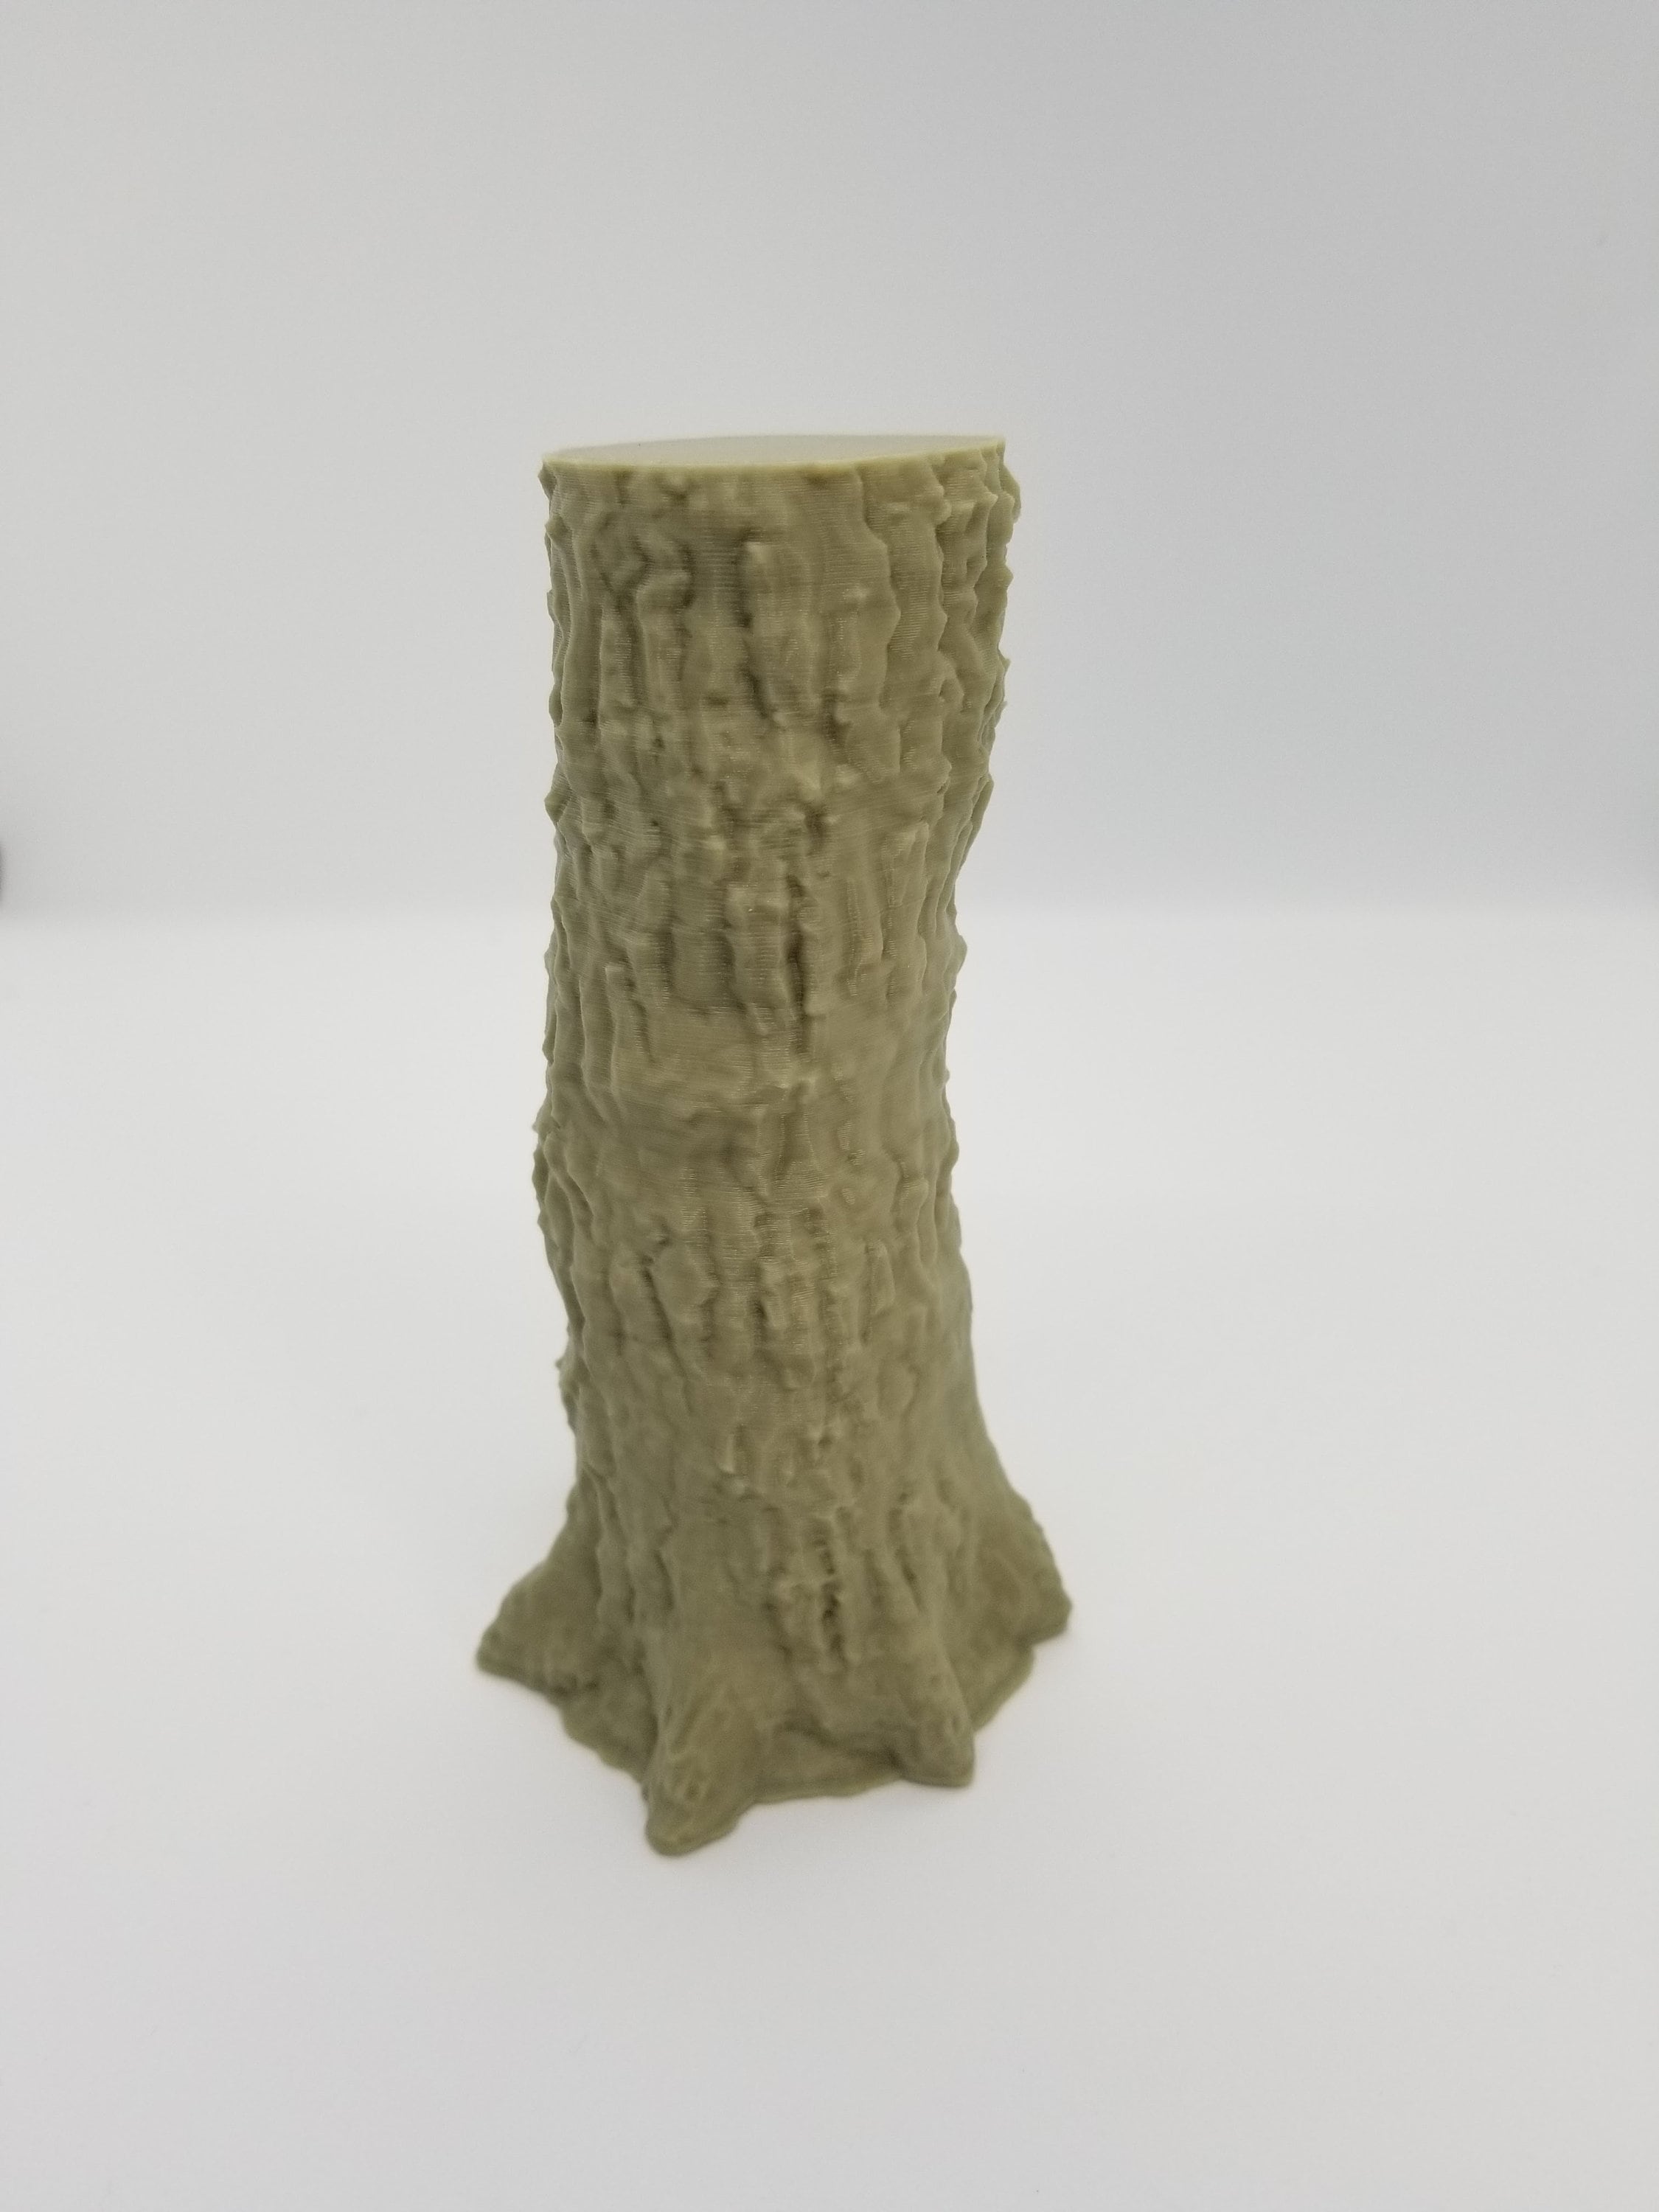 3d Printed 12cm (4.72 in) Tree Pack / SW Legion, Sci-Fi, RPG / Compatible 28mm Tabletop Wargaming Terrain / Print to Order